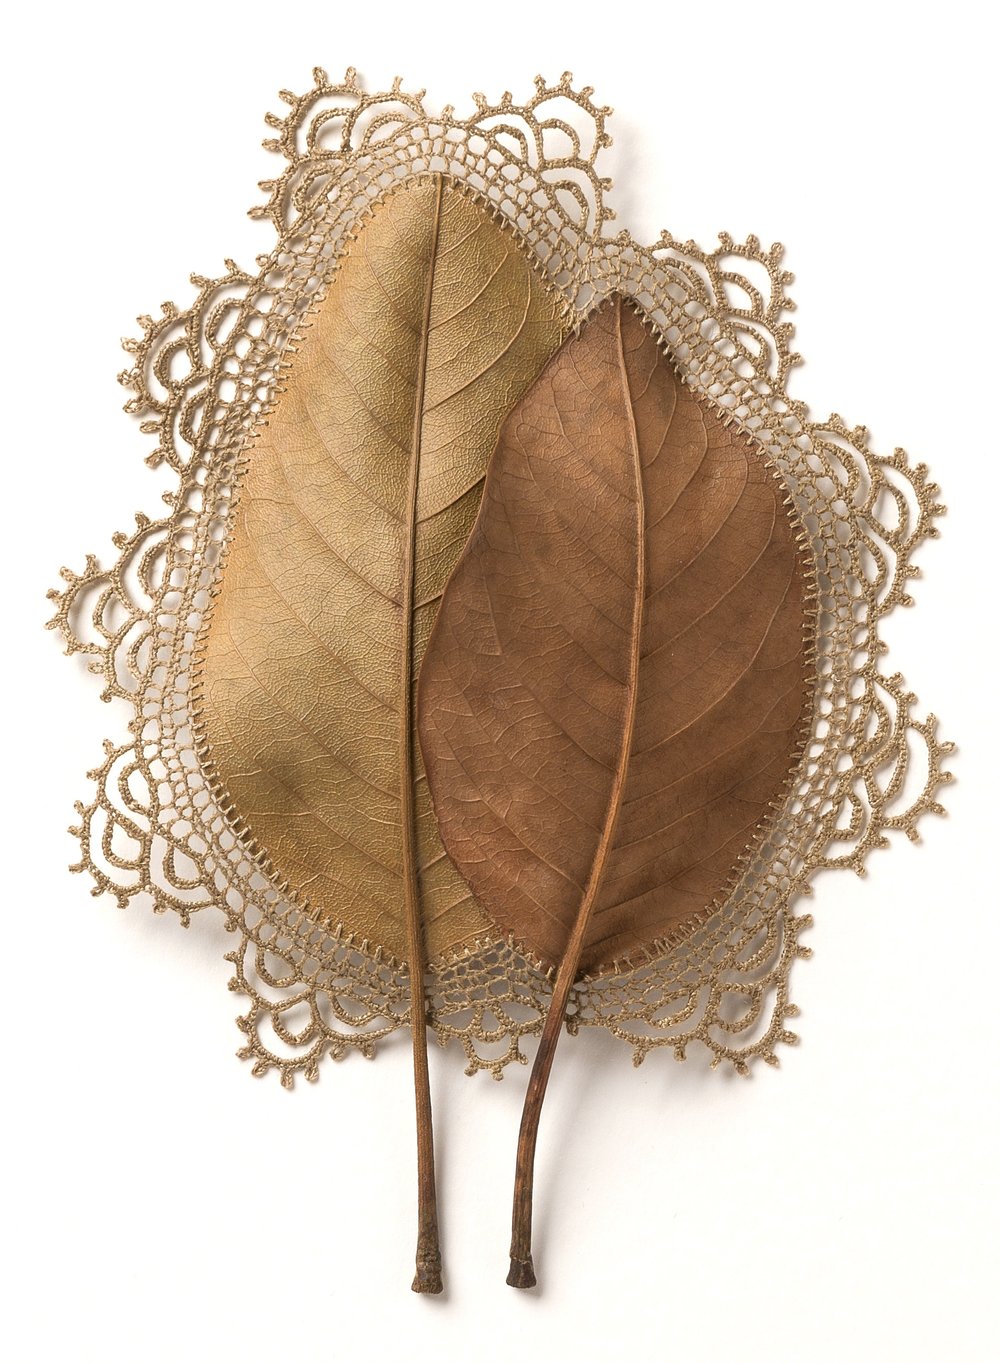 Leaves & Twigs Creative Artworks by Susanna Bauer